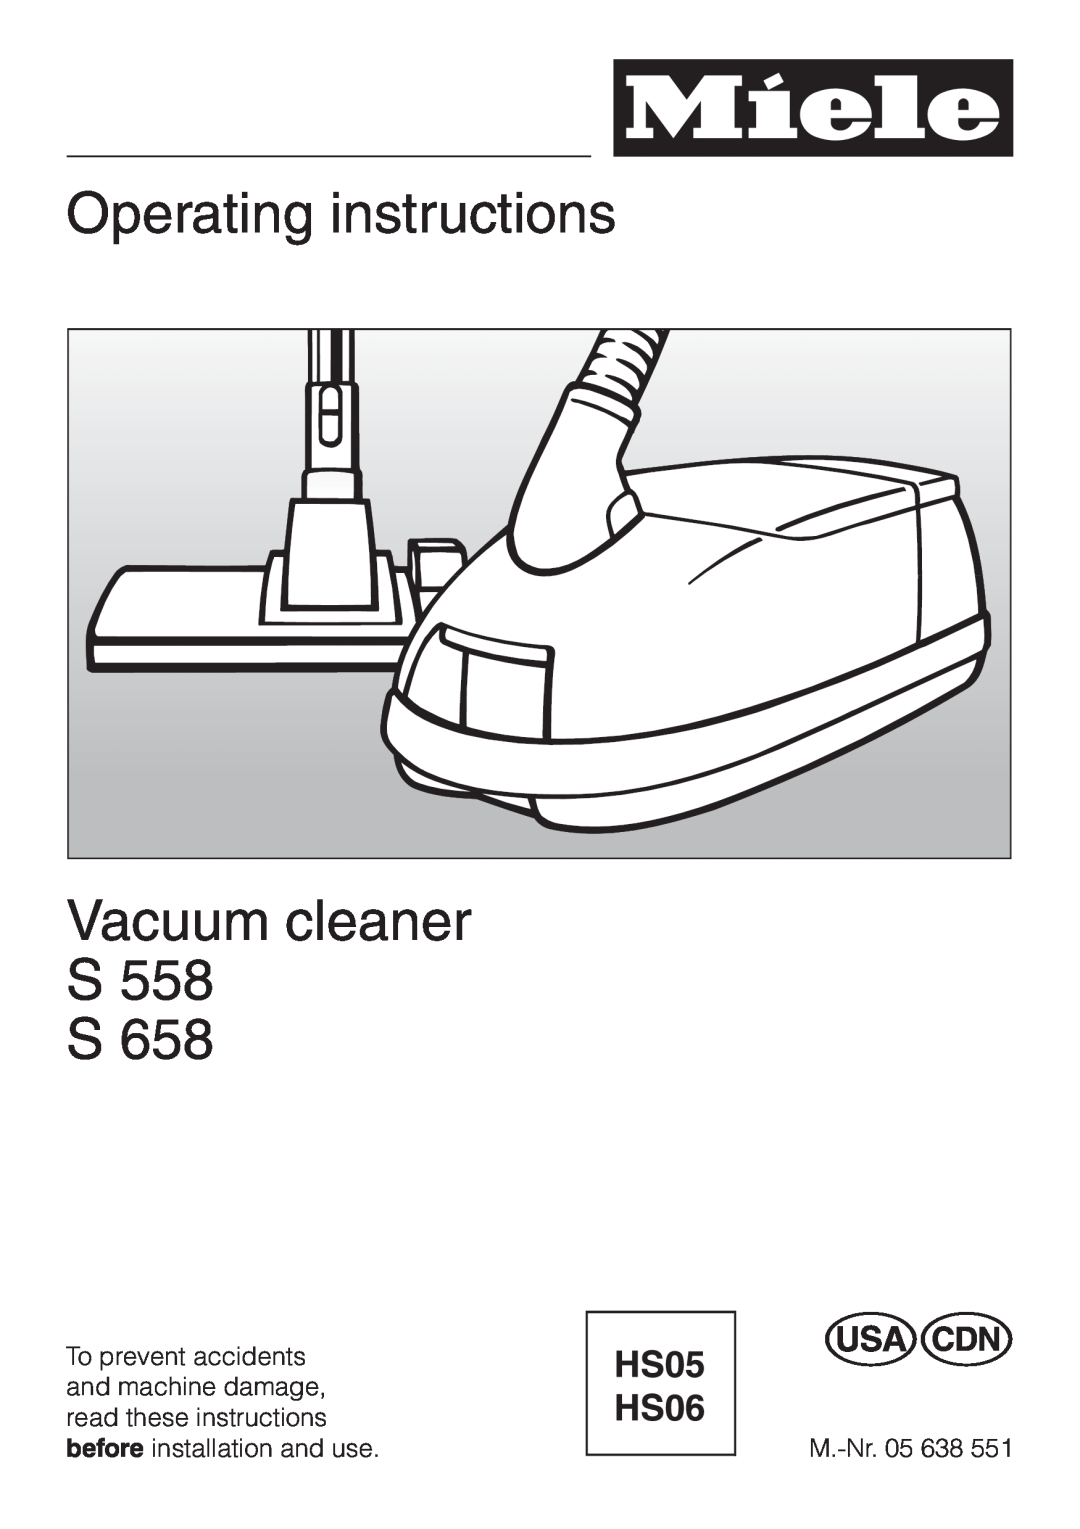 Miele S 658 manual Operating instructions, Vacuum cleaner S558 S658 